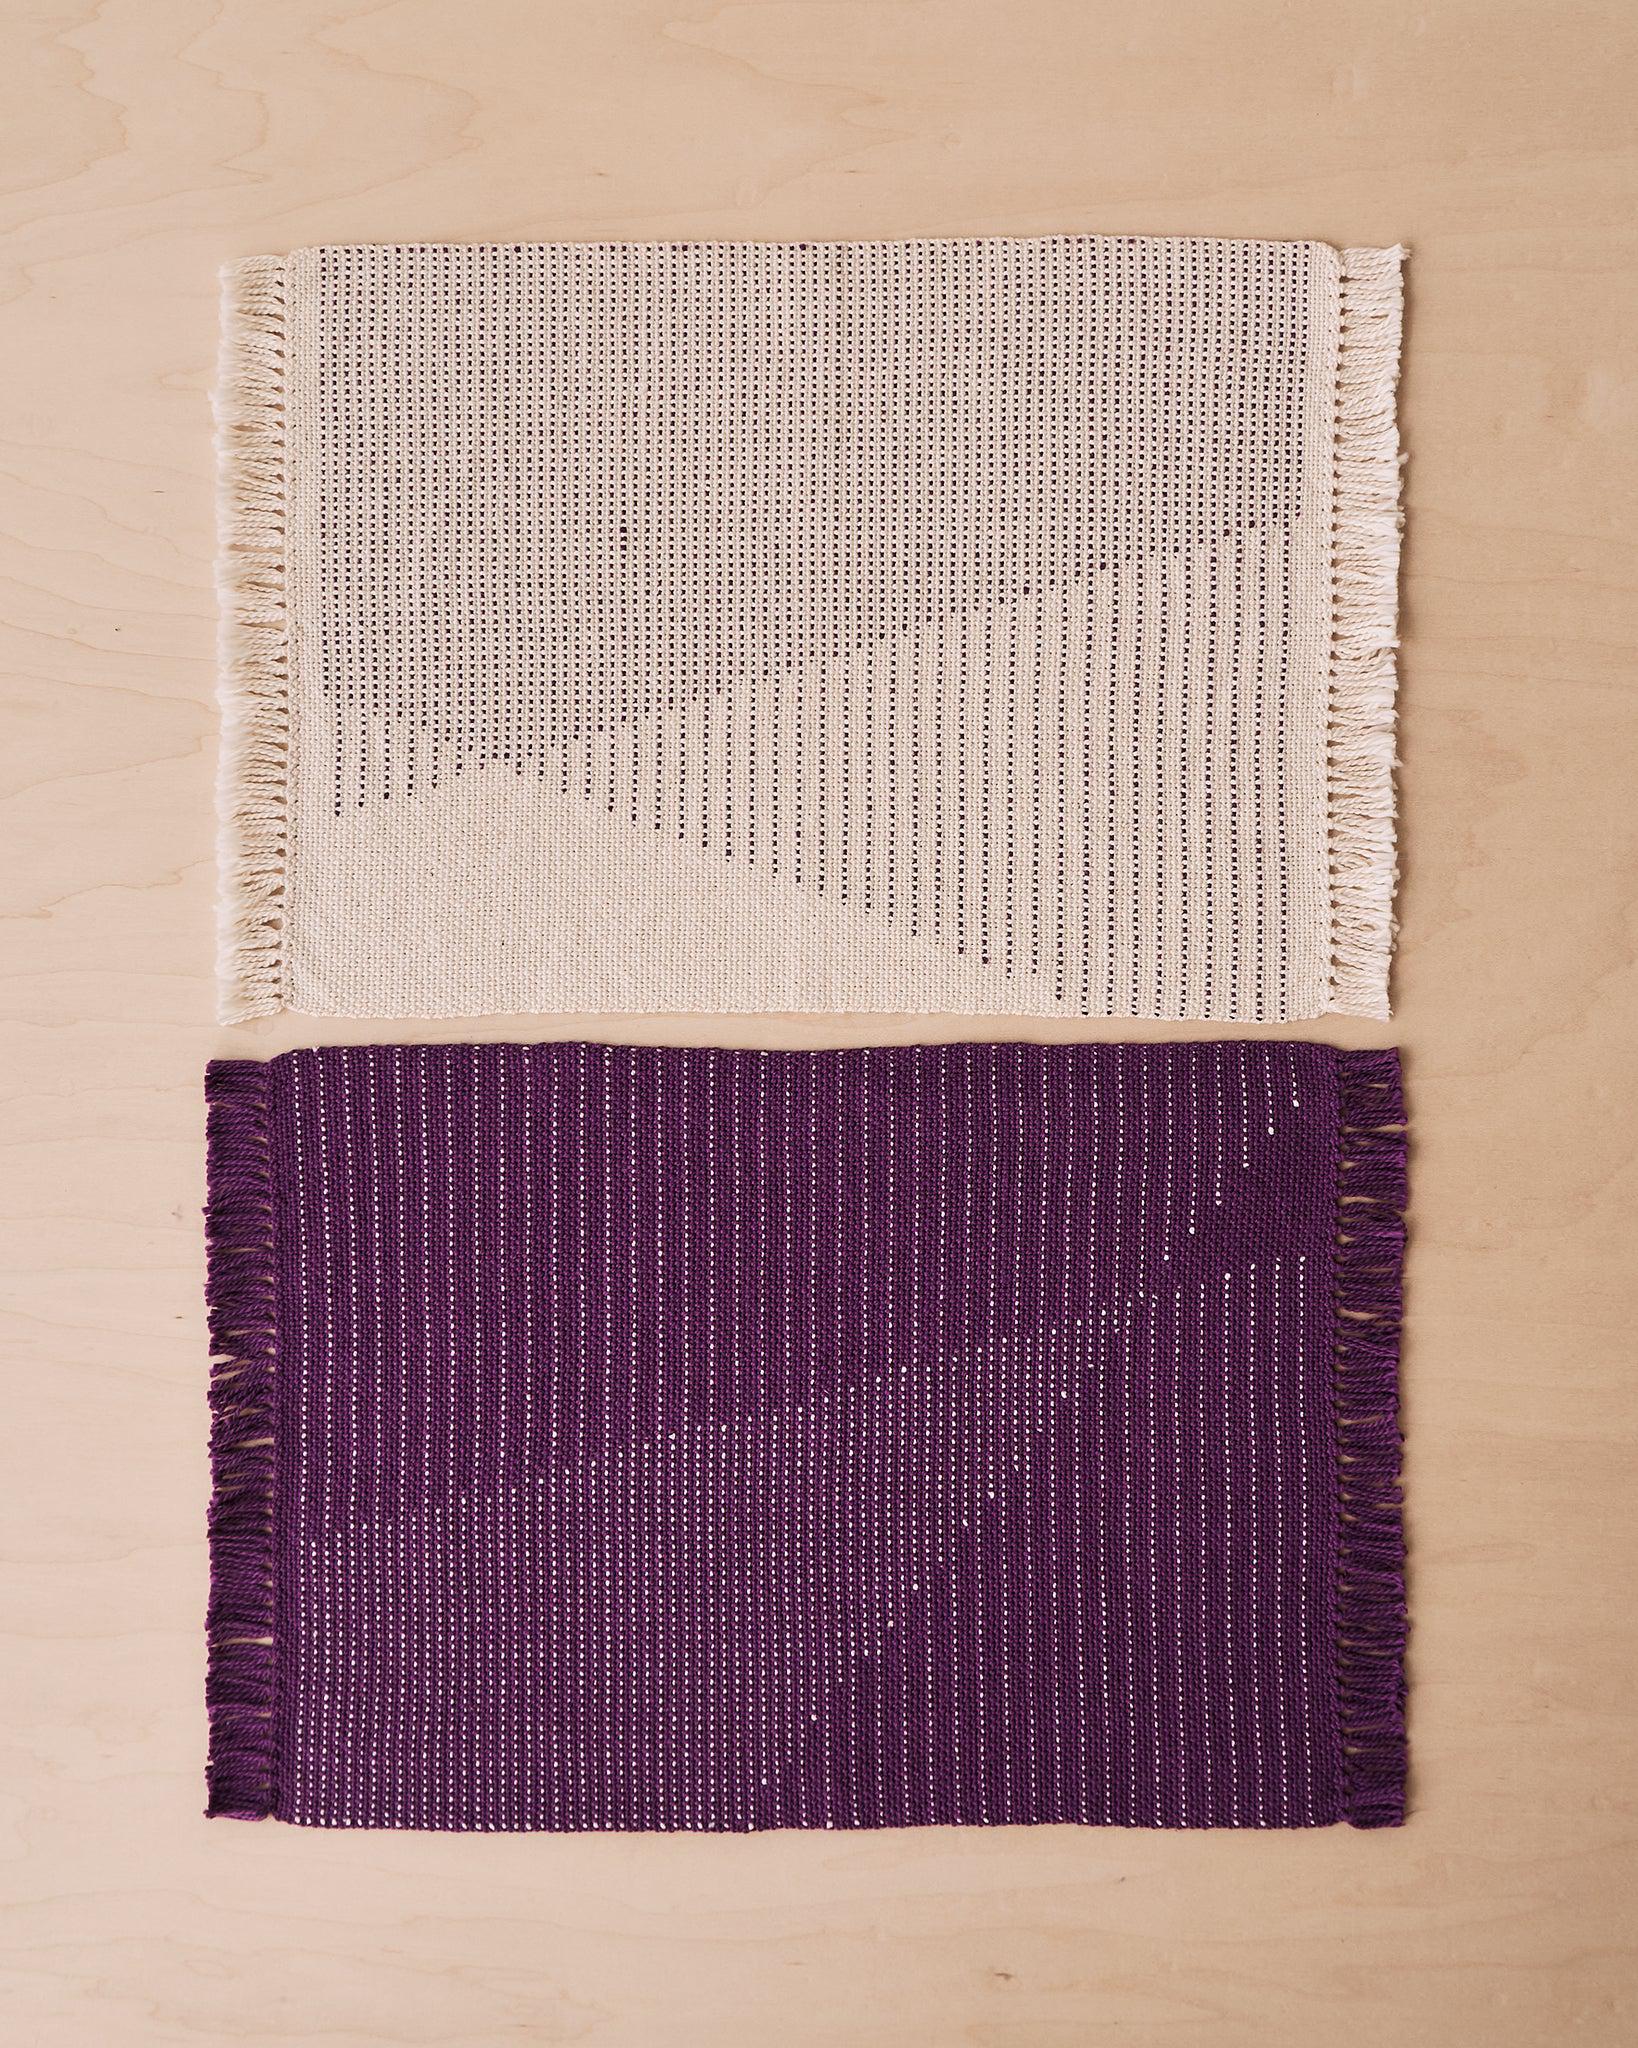 5 Fun (And Free) Weaving Projects: Handwoven Towels and Placemats